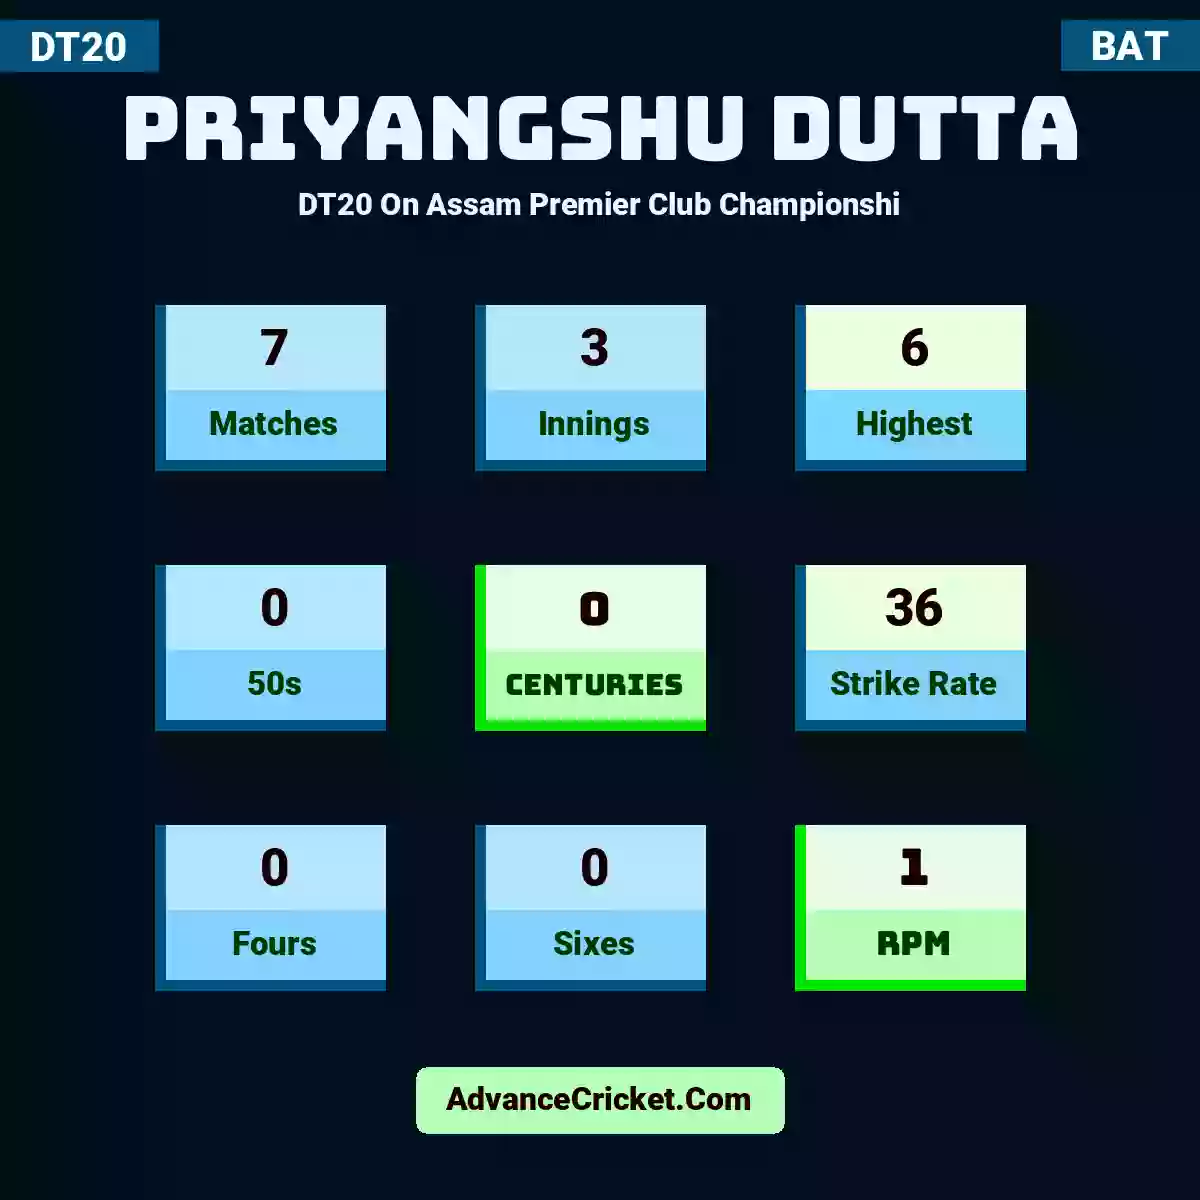 Priyangshu Dutta DT20  On Assam Premier Club Championshi, Priyangshu Dutta played 7 matches, scored 6 runs as highest, 0 half-centuries, and 0 centuries, with a strike rate of 36. p.dutta hit 0 fours and 0 sixes, with an RPM of 1.